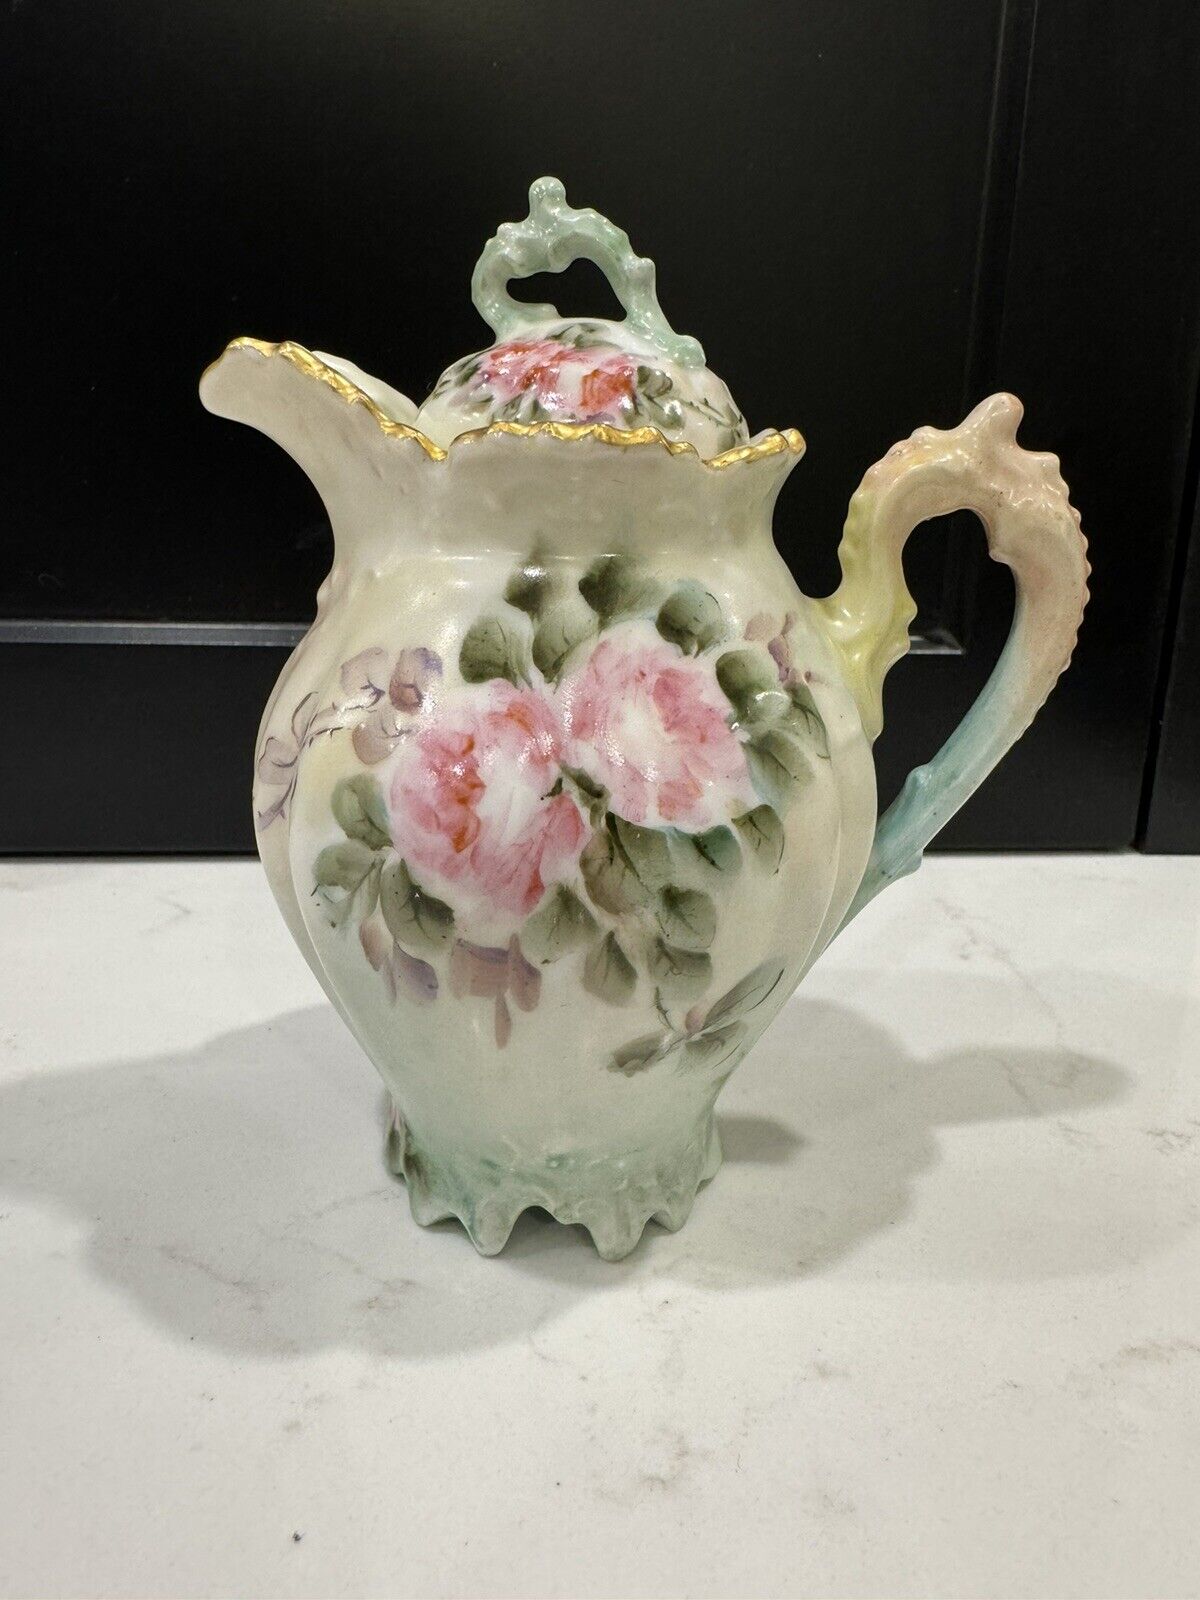 Antique German Porcelain Creamer Pitcher With Hand Painted Roses